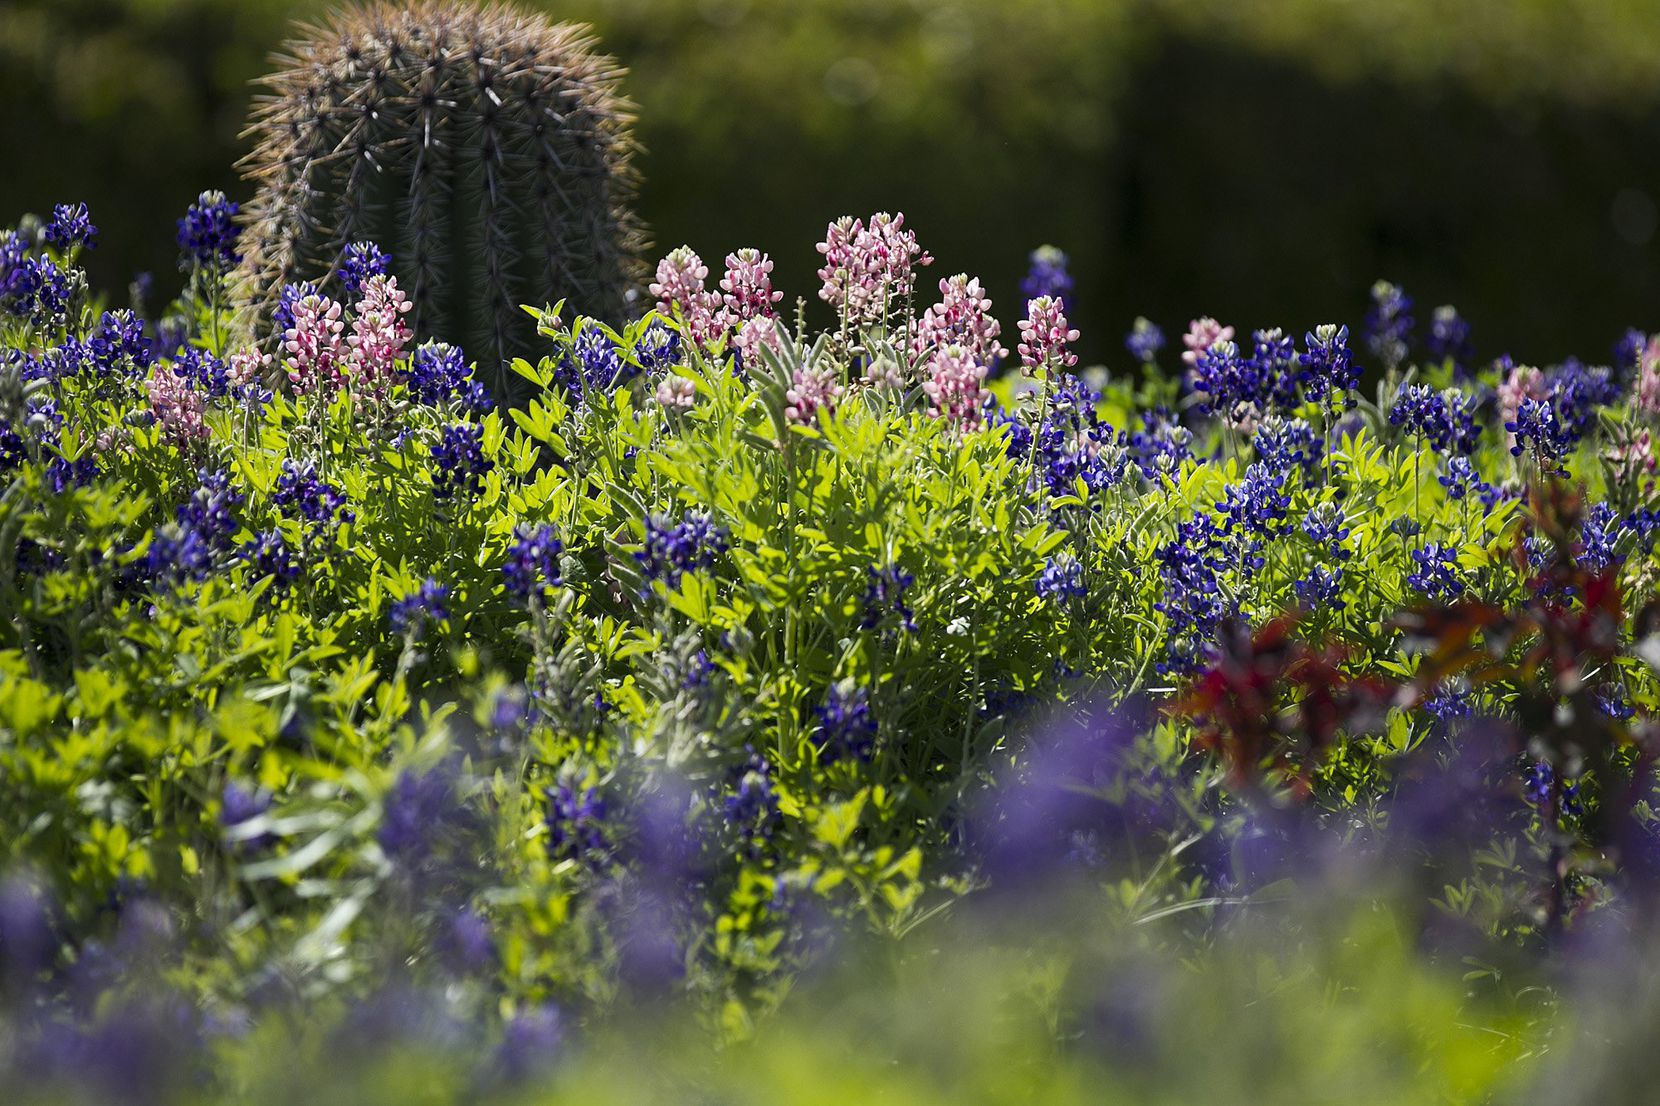 Bluebonnets bloom near the UT Tower on the University of Texas campus in Austin. The flower...